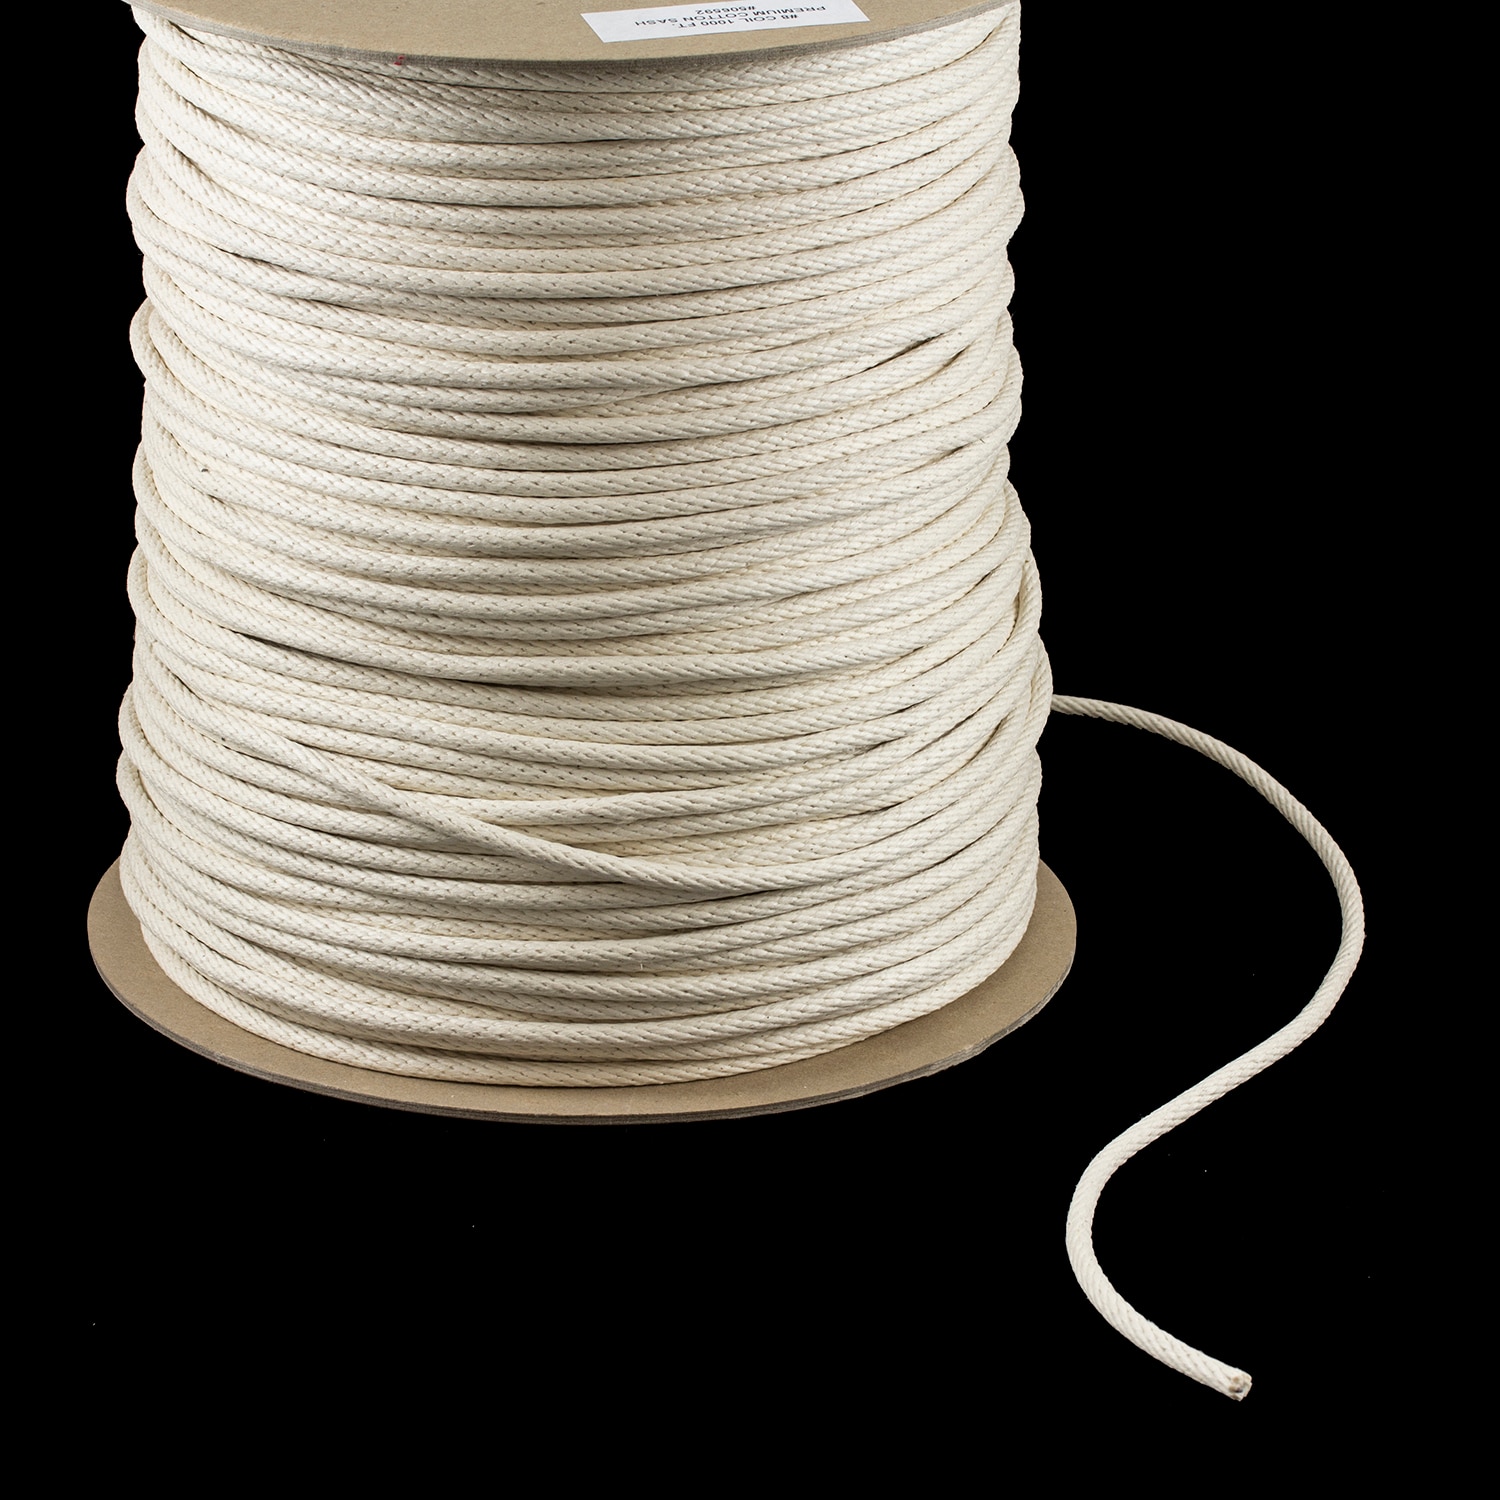 Solid Braided Cotton Covered Premium Sash Cord #8 1/4 x 1000' Natural